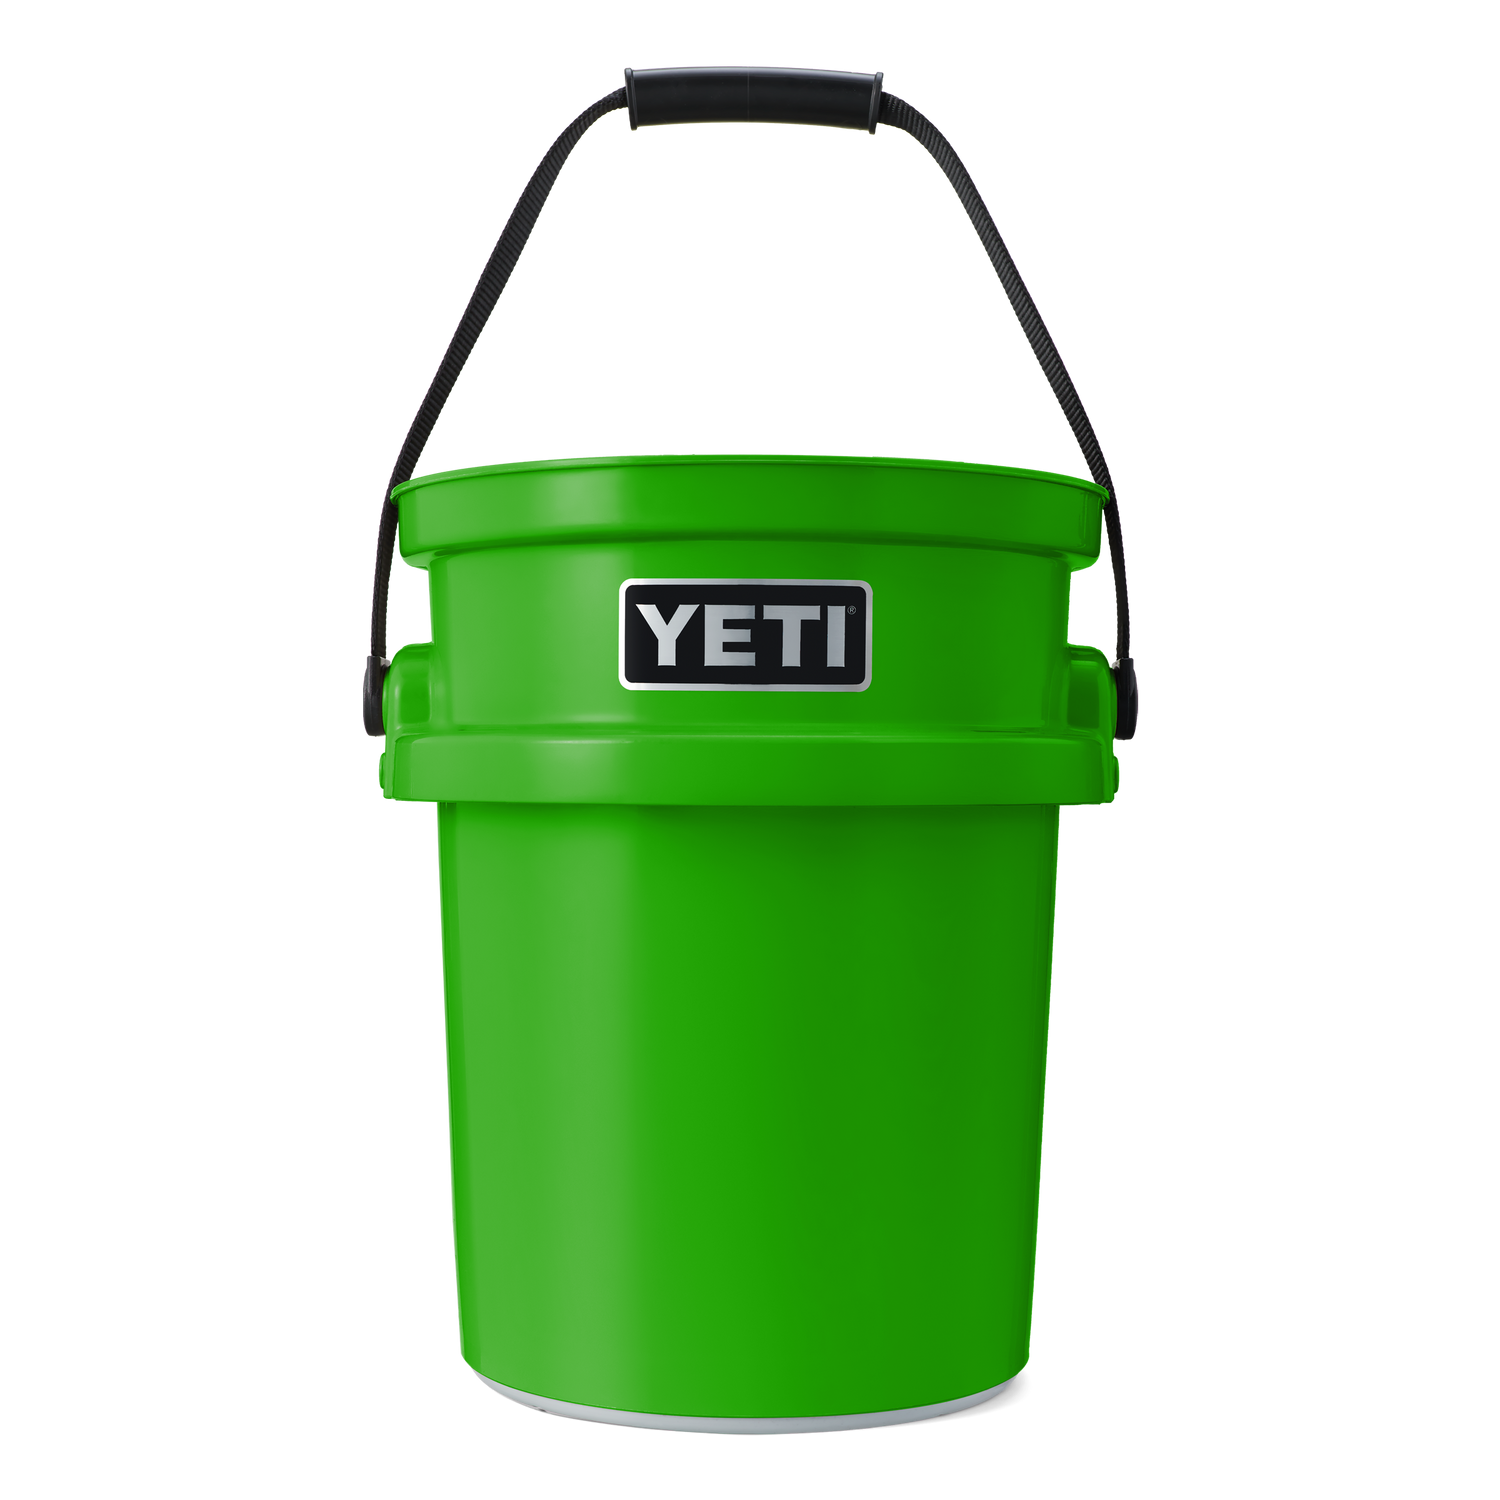 Green Top Hunt Fish - YETI has arrived! We have the all new